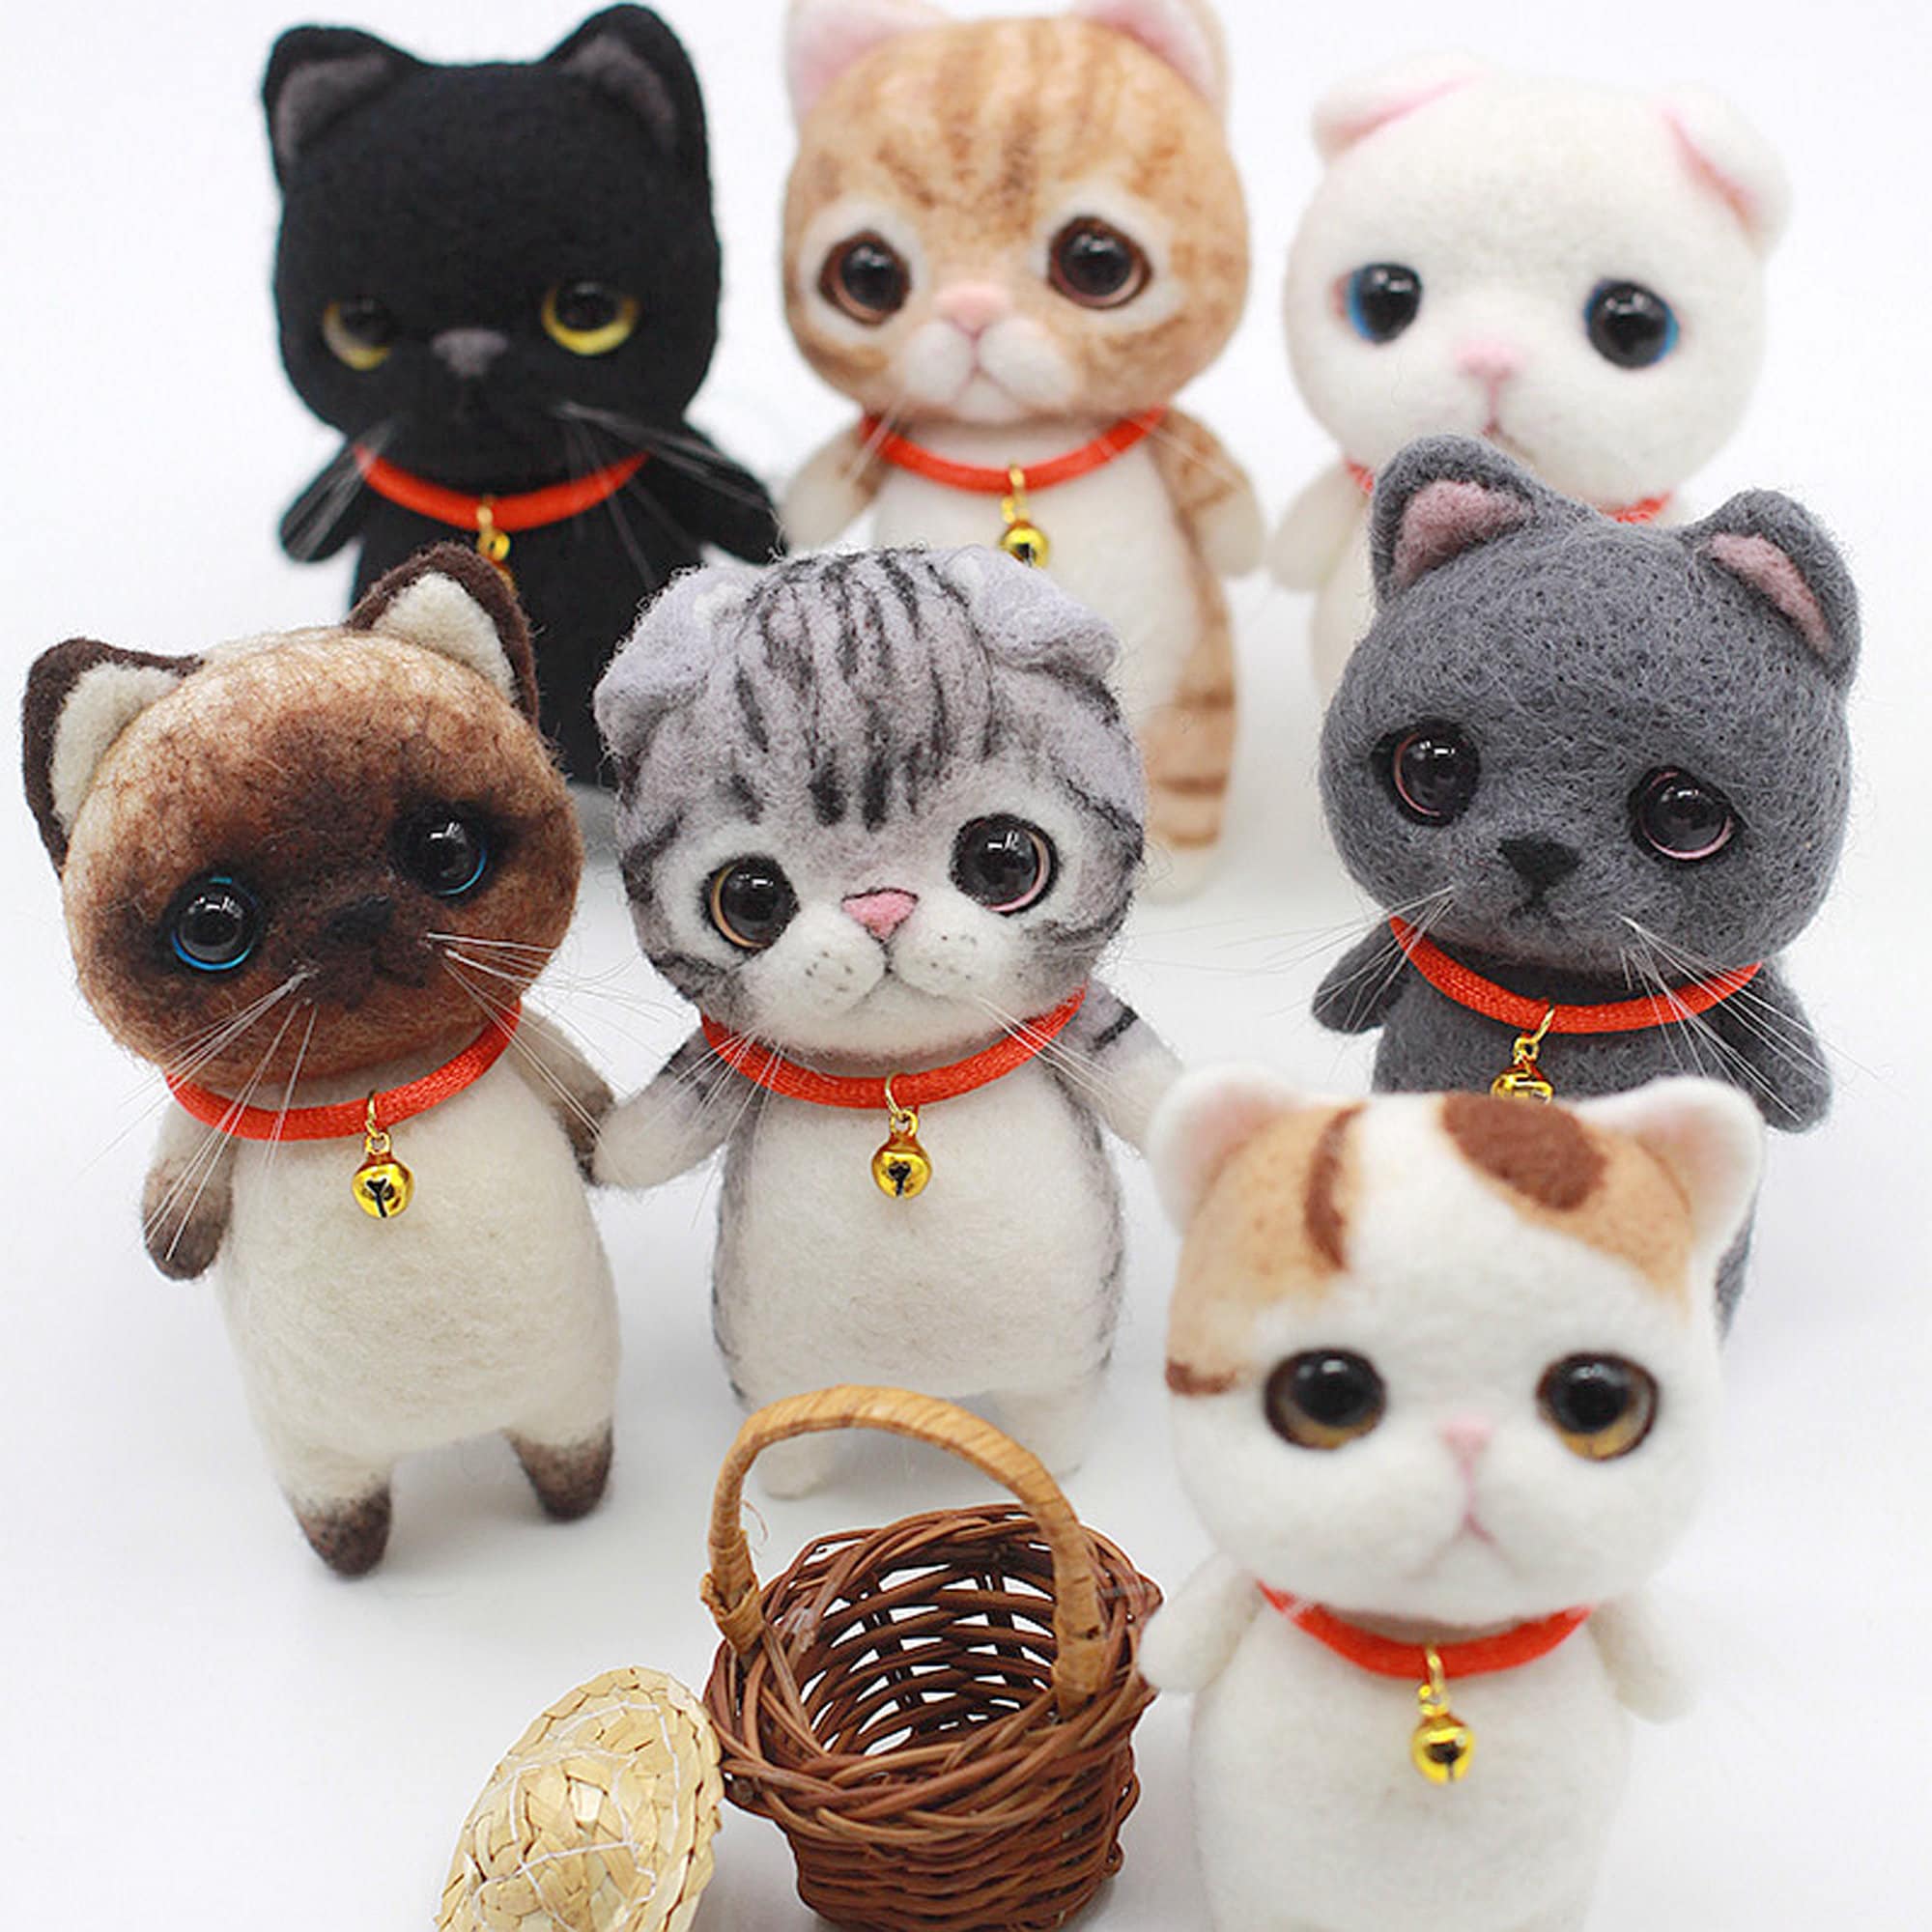 Cute Plush Sleeping Cats Doll Simulation Sound Kittens Shoe Toys Gift NT 